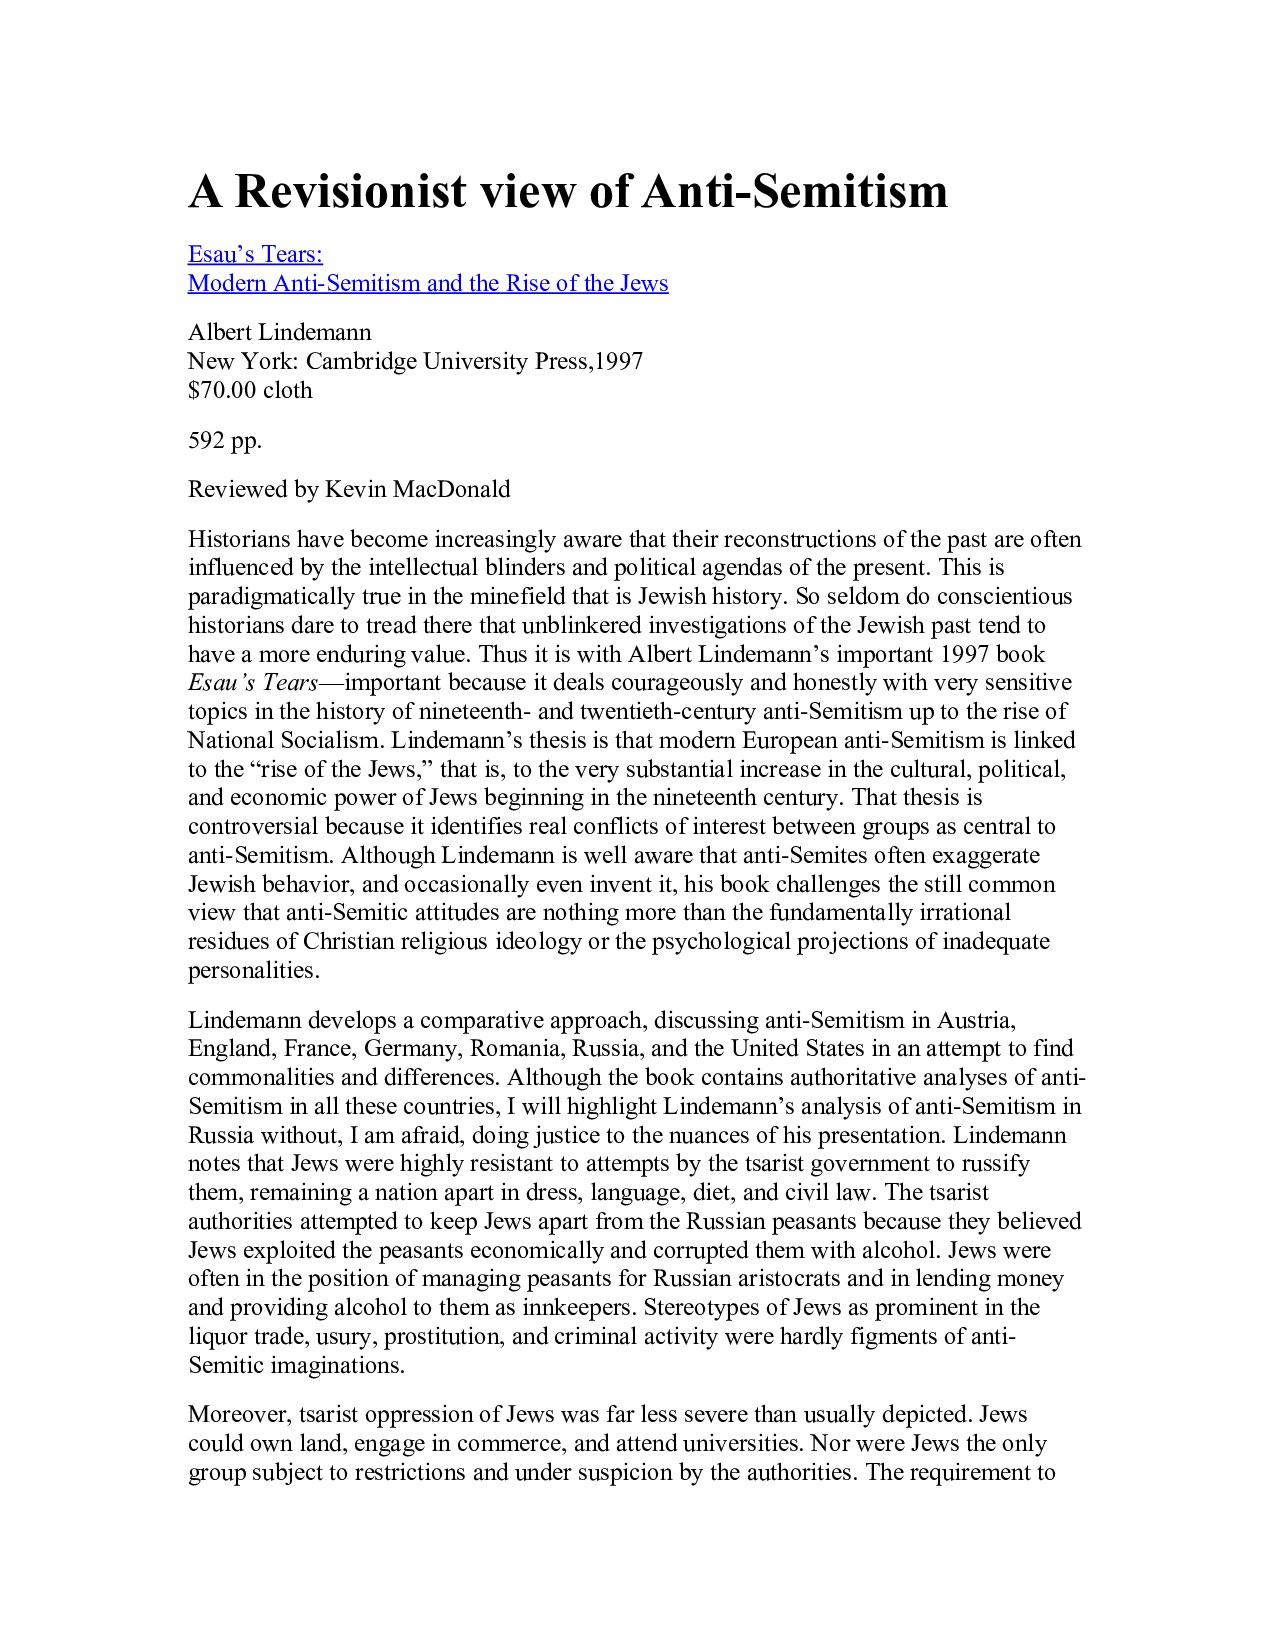 MacDonald, Kevin; A Revisionist View of Anti-Semitism (Review)